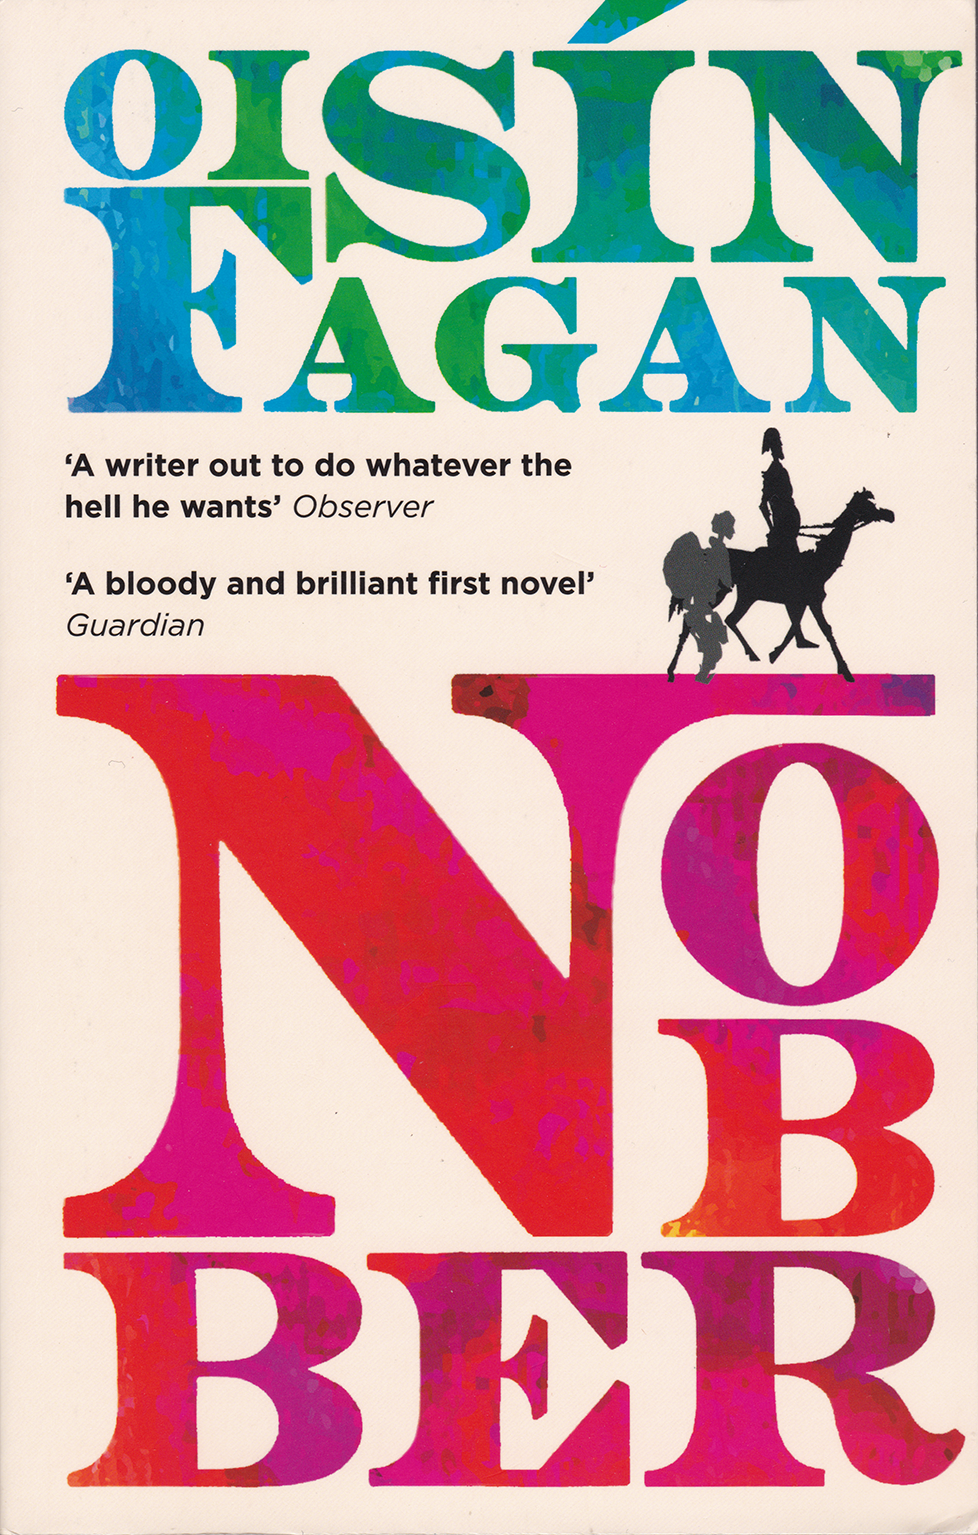 The book cover for Nobber